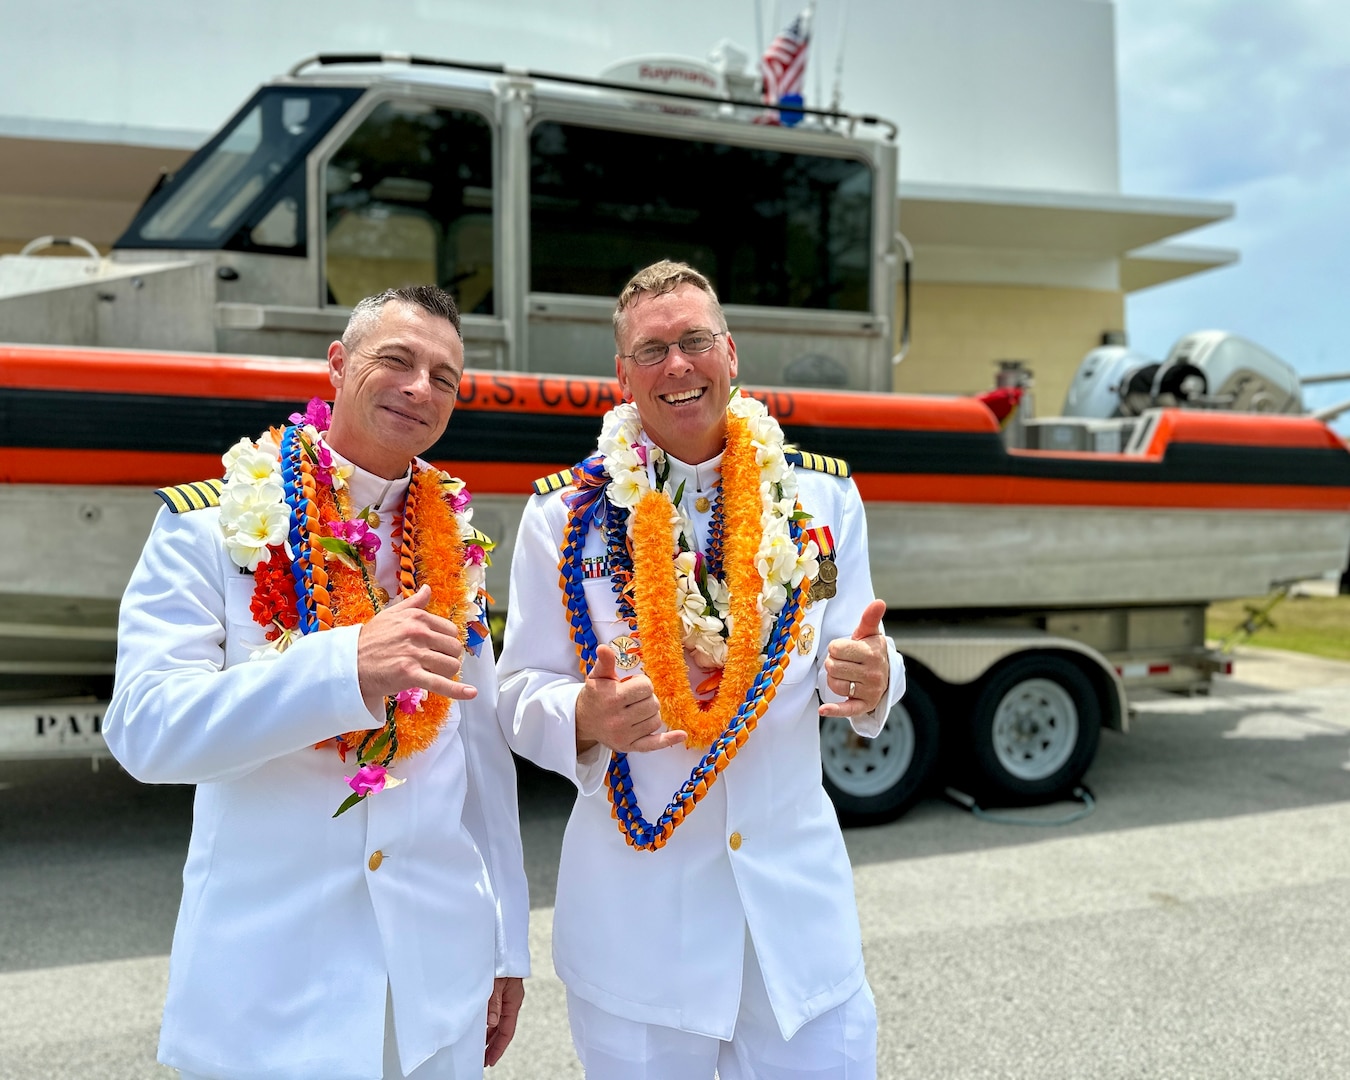 Capt. Rob Kistner takes command of U.S. Coast Guard Forces Micronesia Sector Guam from Capt. Nick Simmons in a change of command ceremony at Victor Pier in Apra Harbor, Guam, on May 23, 2024. Rear Adm. Michael Day, U.S. Coast Guard 14th District commander, presided over the ceremony. Hailing from Tallahassee, Florida, Capt. Simmons leaves Guam to rejoin the staff at U.S. Coast Guard Headquarters as the chief of the Office of Budget and Programs (CG-82). Capt. Rob Kistner, a native of Rochester, New York, joins the Forces Micronesia team after serving as the chief of Prevention for the U.S. Coast Guard 14th District. (U.S. Coast Guard photo by Chief Warrant Officer Sara Muir)